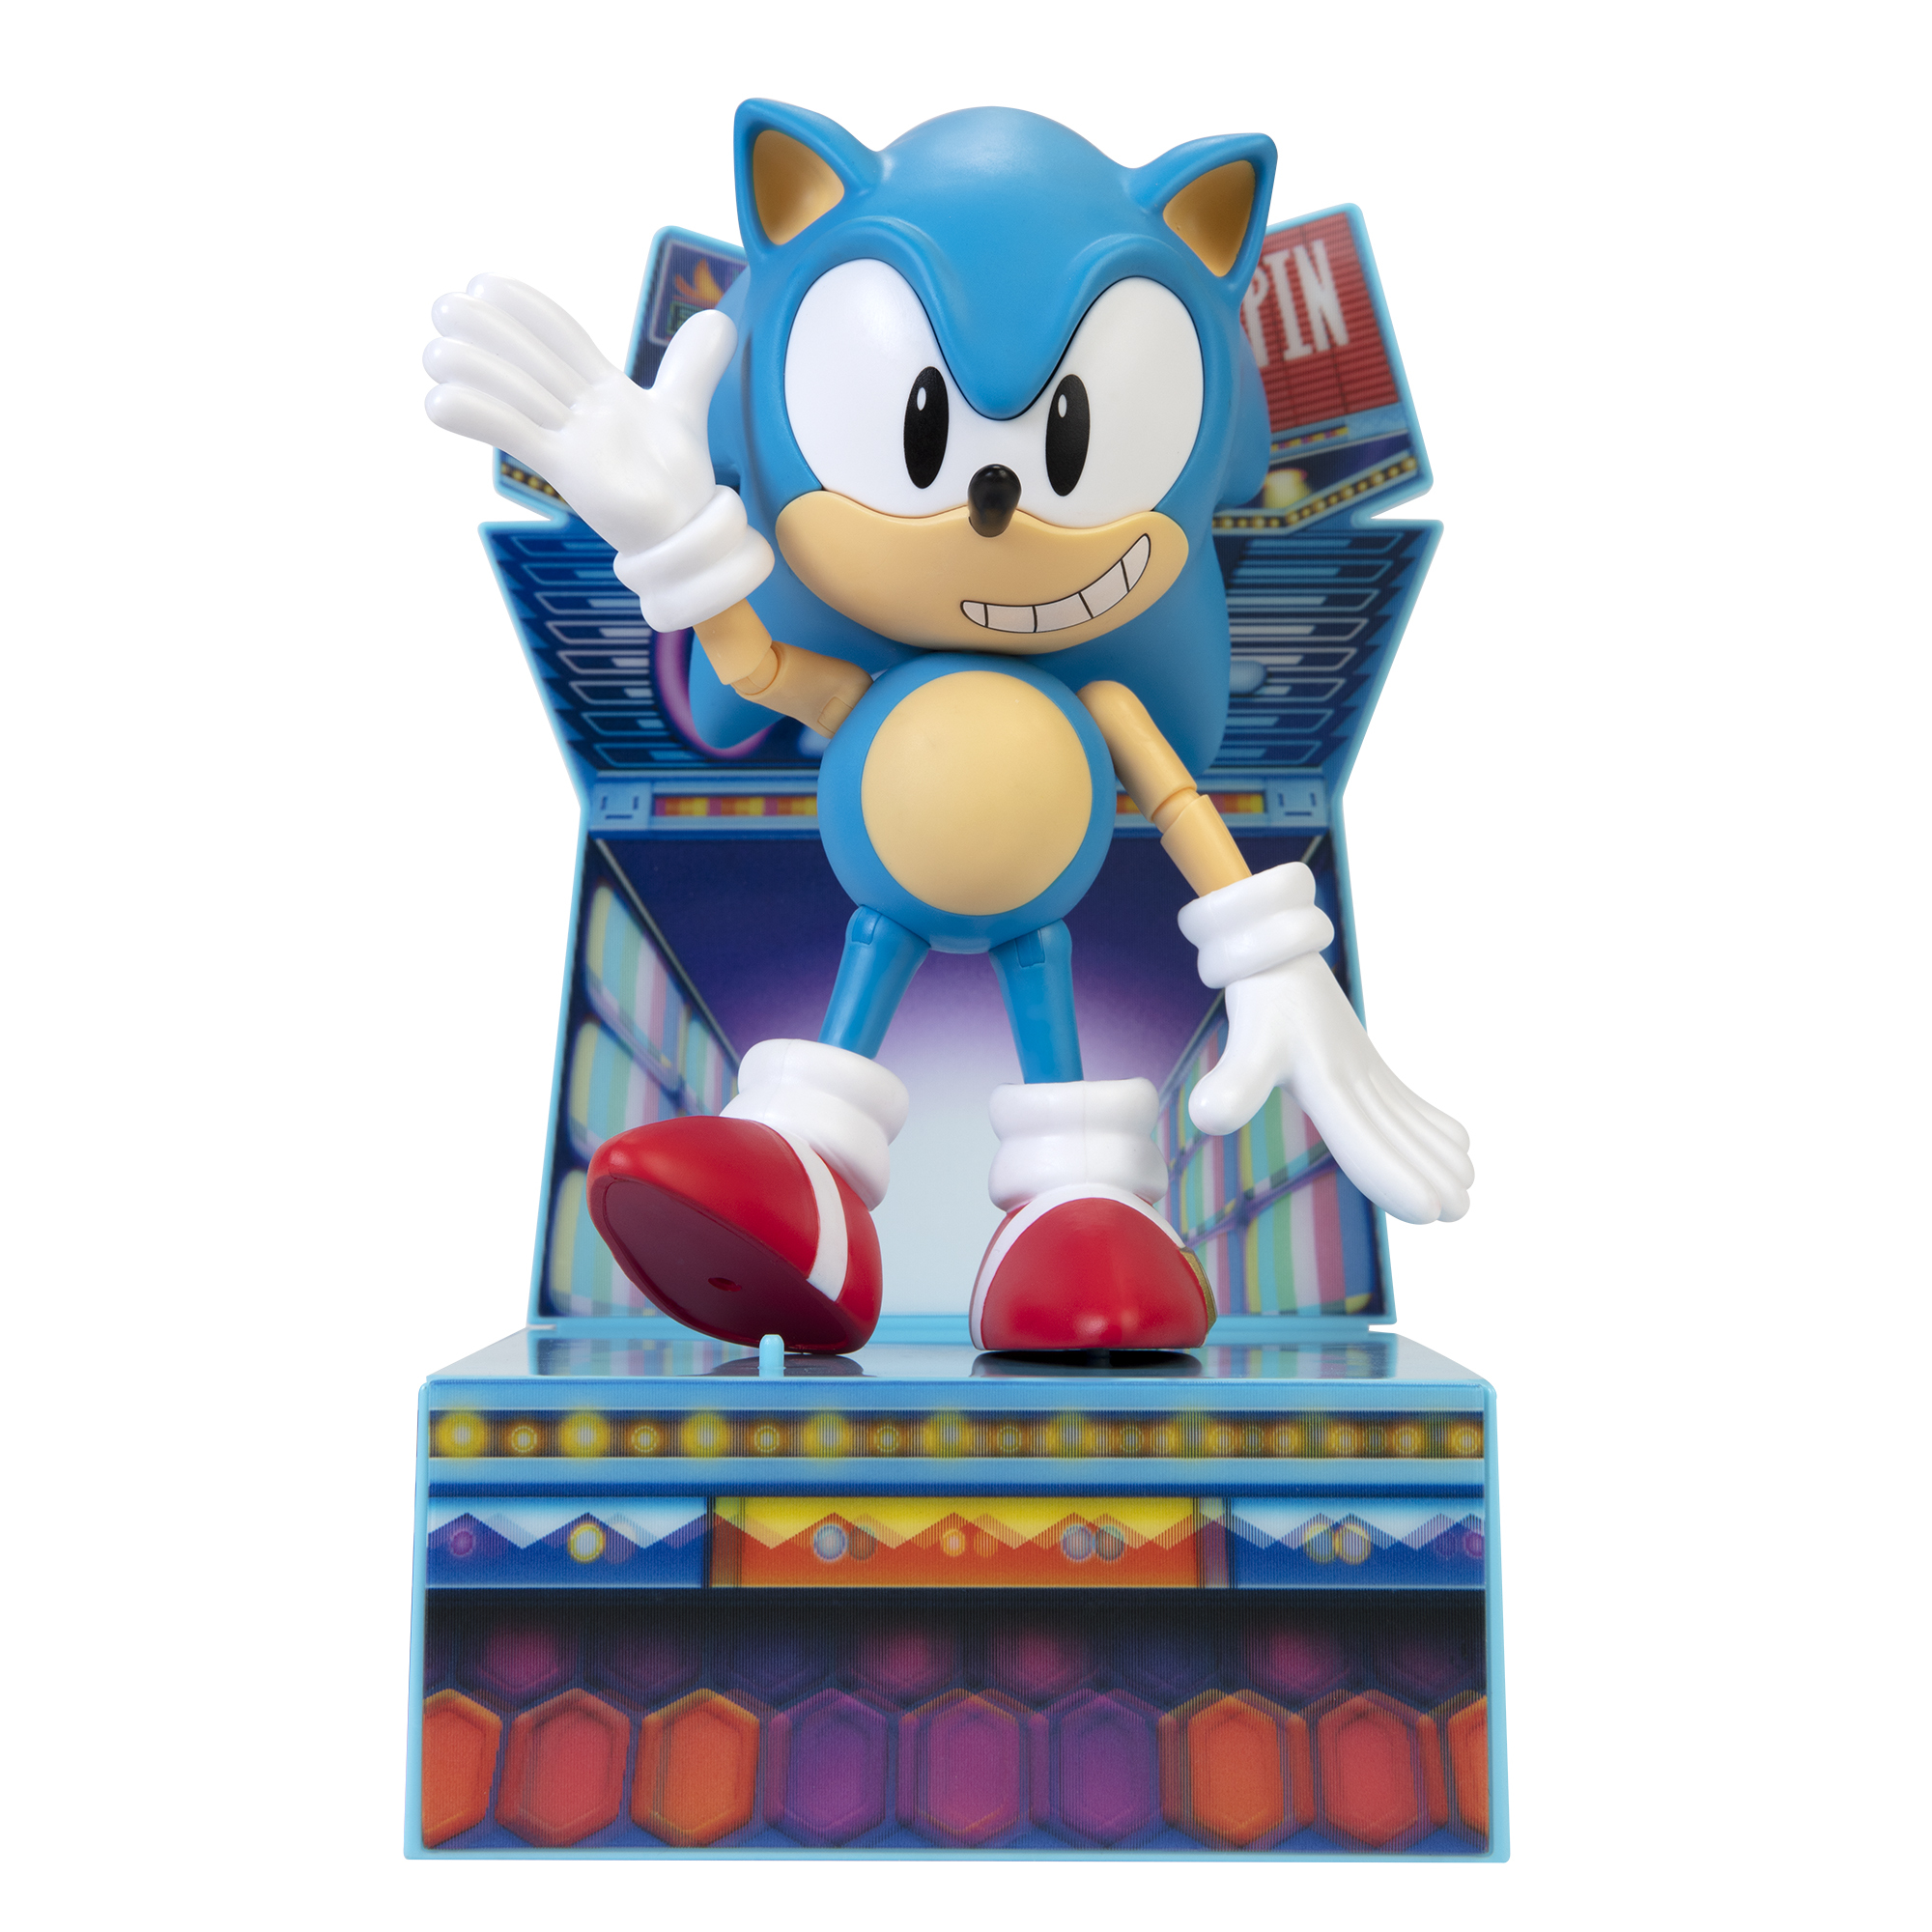 SONIC THE HEDGEHOG TOMY 3 ACTION FIGURE Knuckles Tails Movie Sonic READ